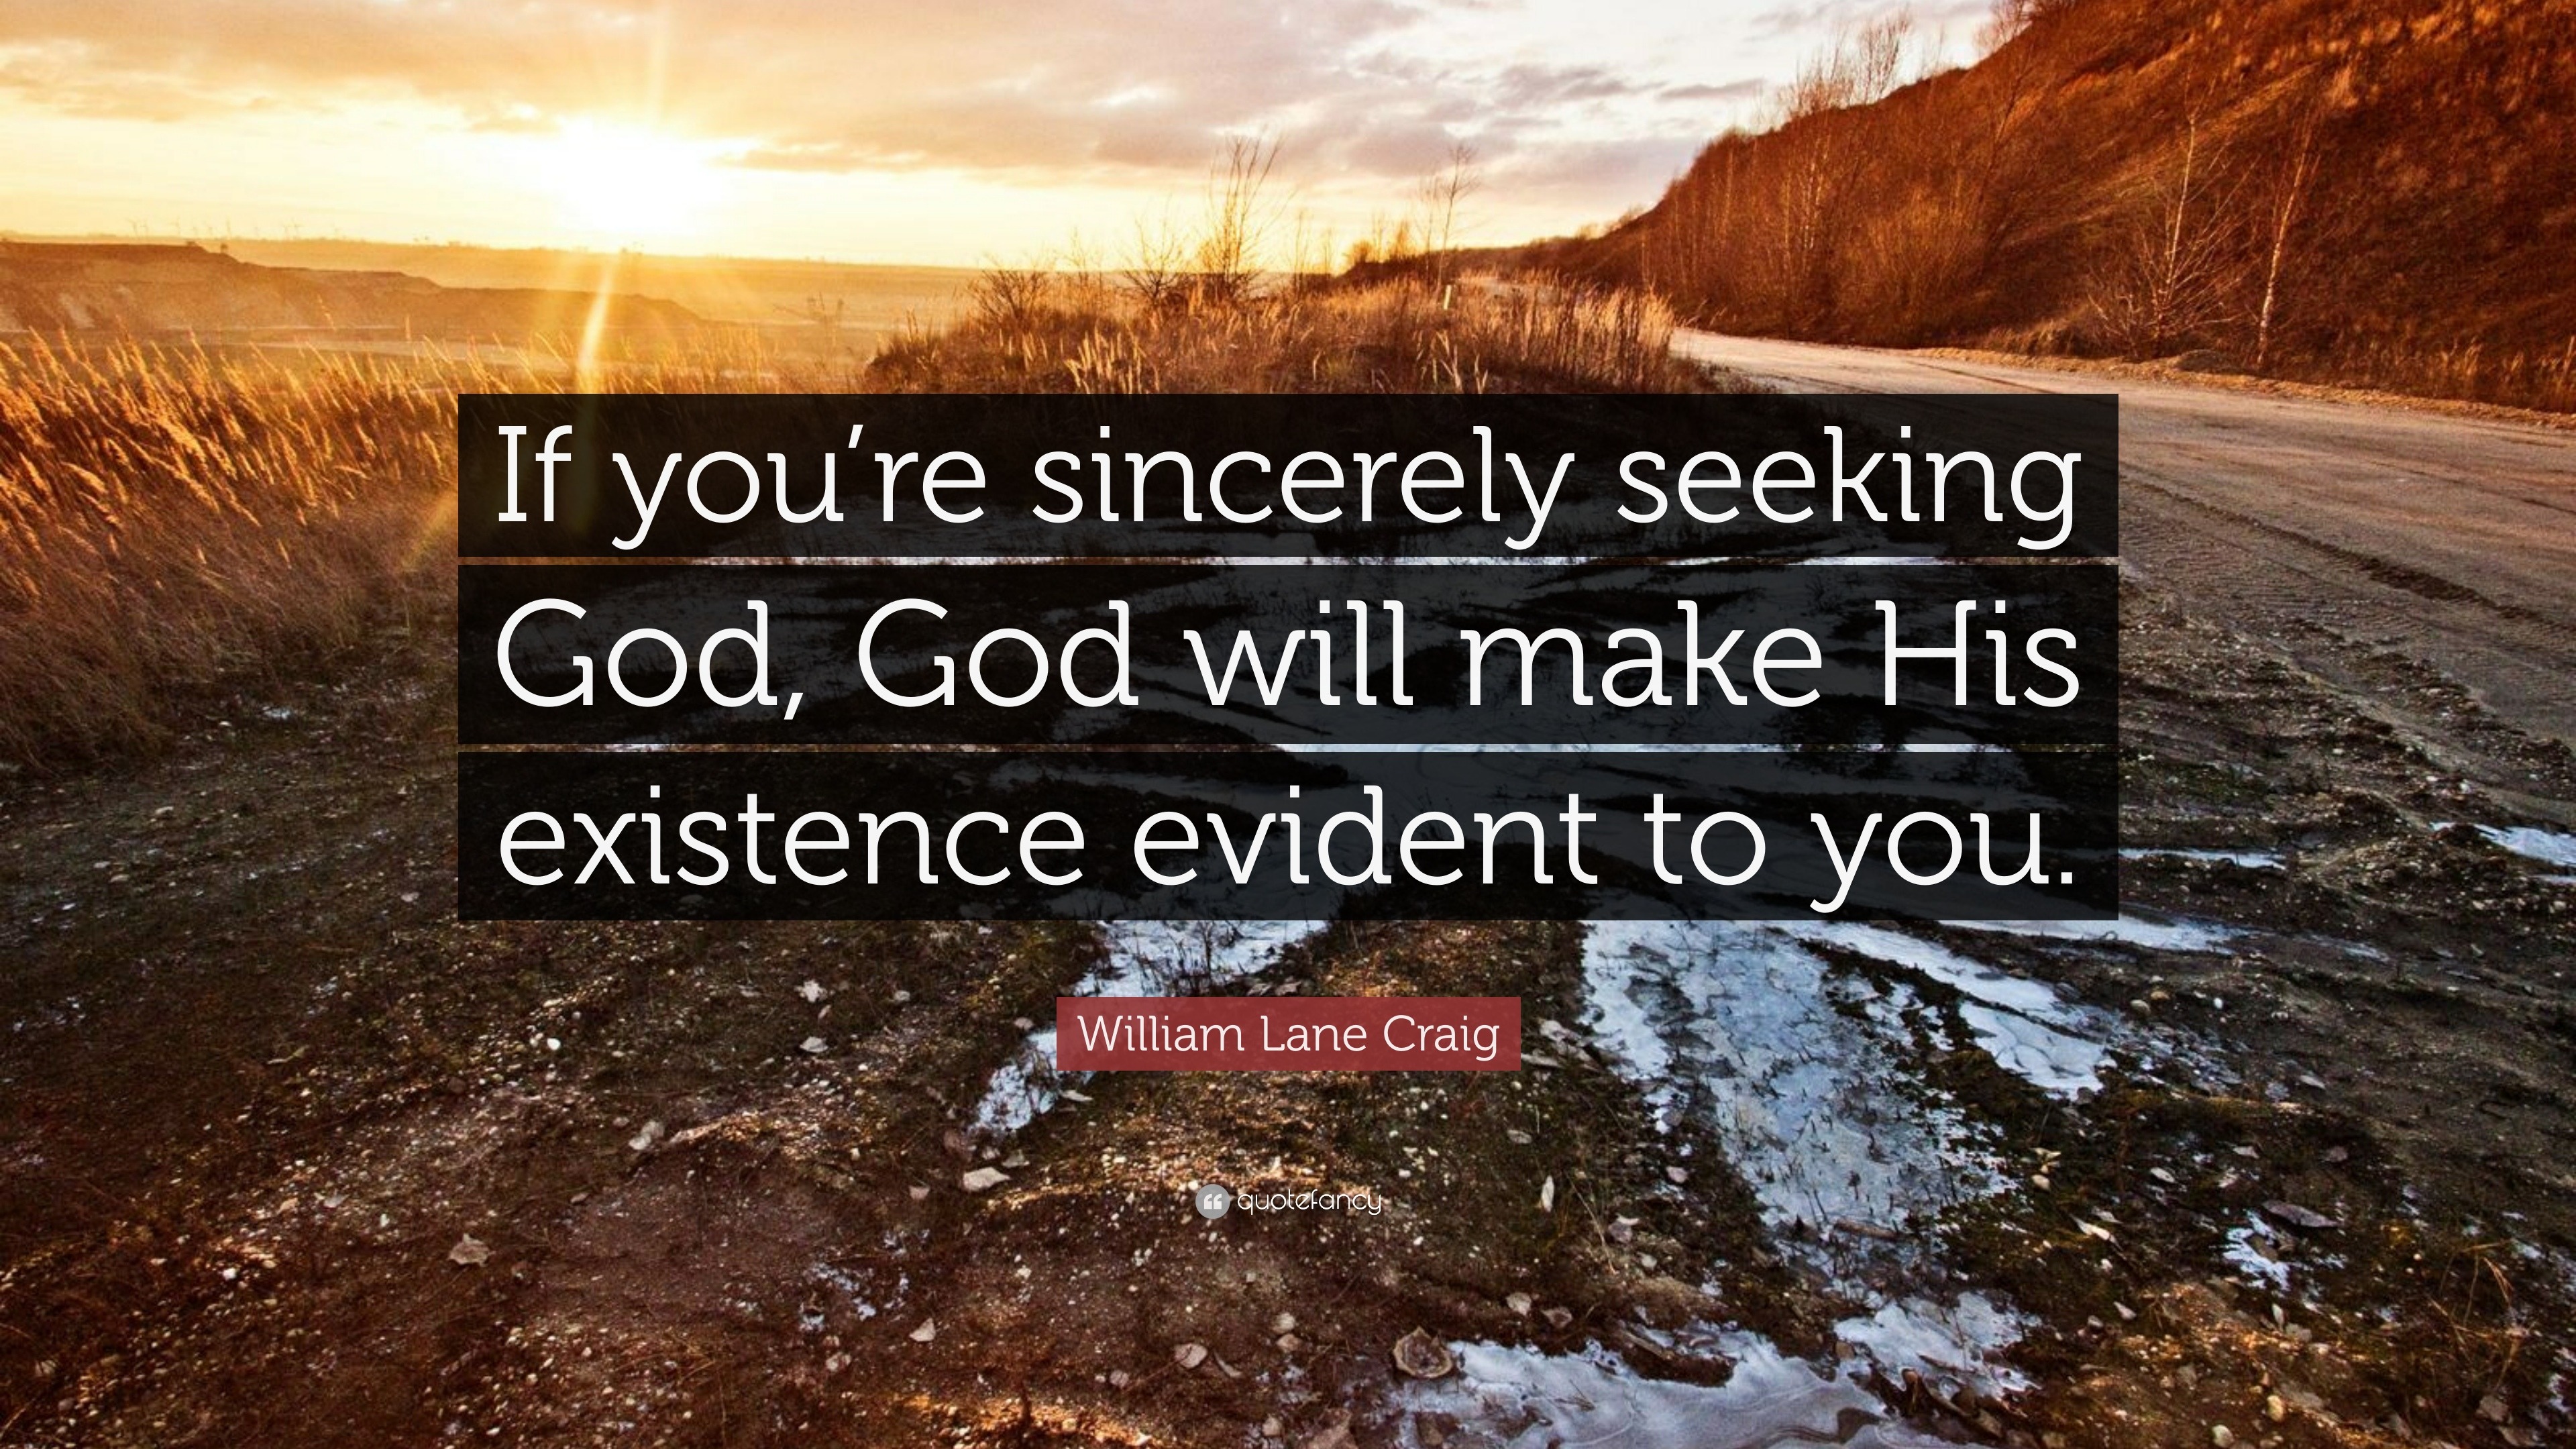 William Lane Craig Quote “if Youre Sincerely Seeking God God Will